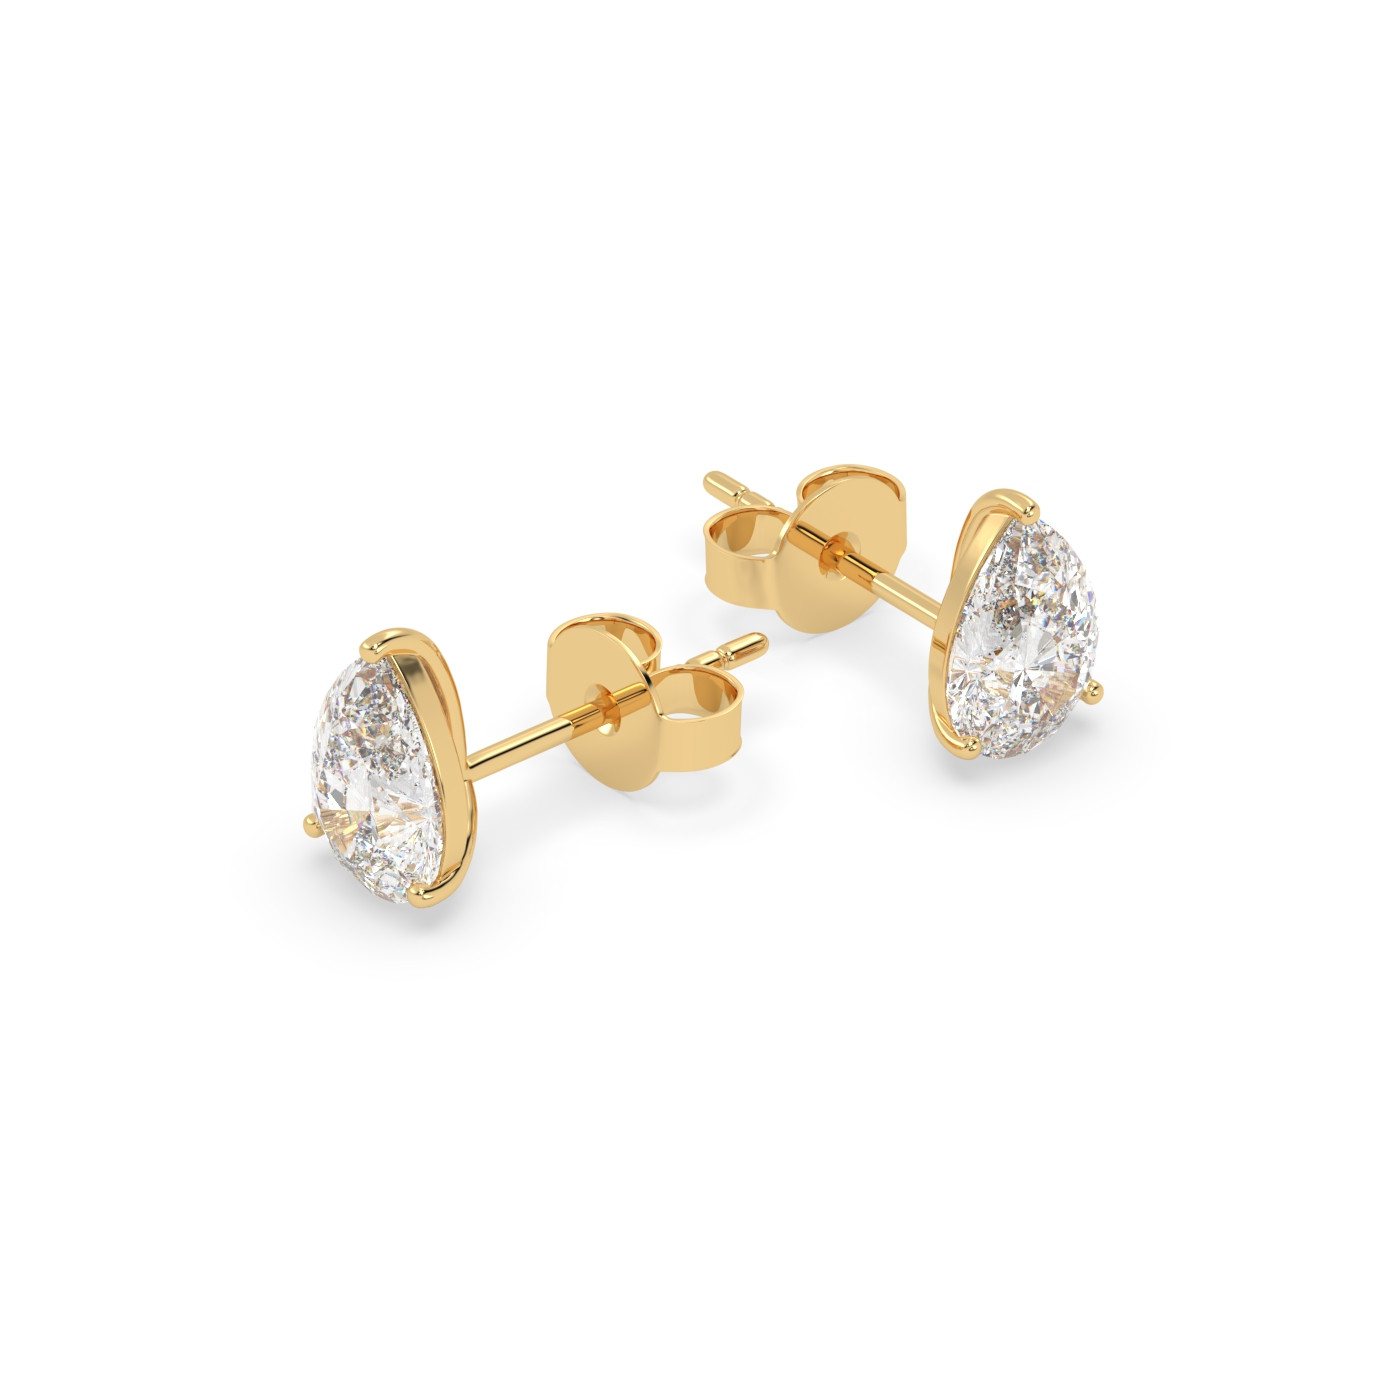 18k yellow gold  1.0 carat pear stud earrings with butterfly back